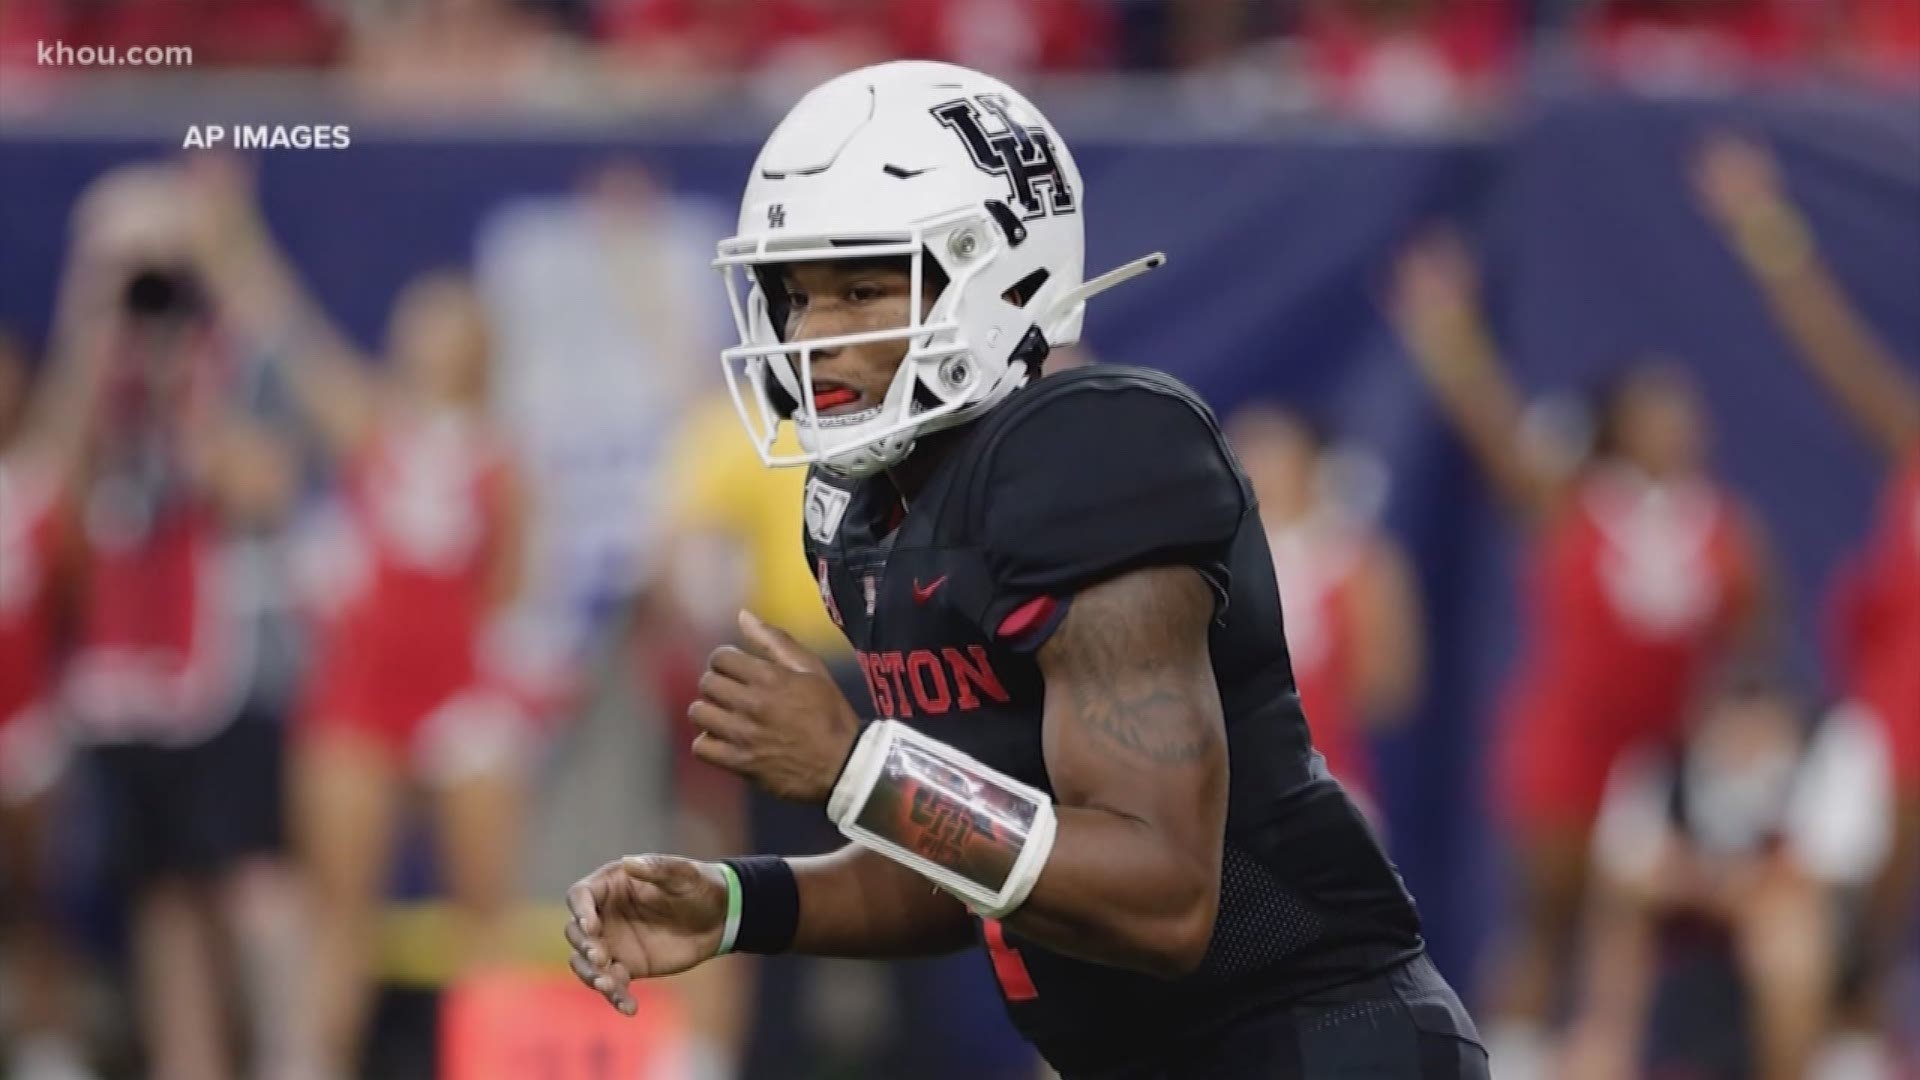 Houston Cougars quarterback D'Eriq King announced he is entering his name into the transfer portal after redshirting this past season.